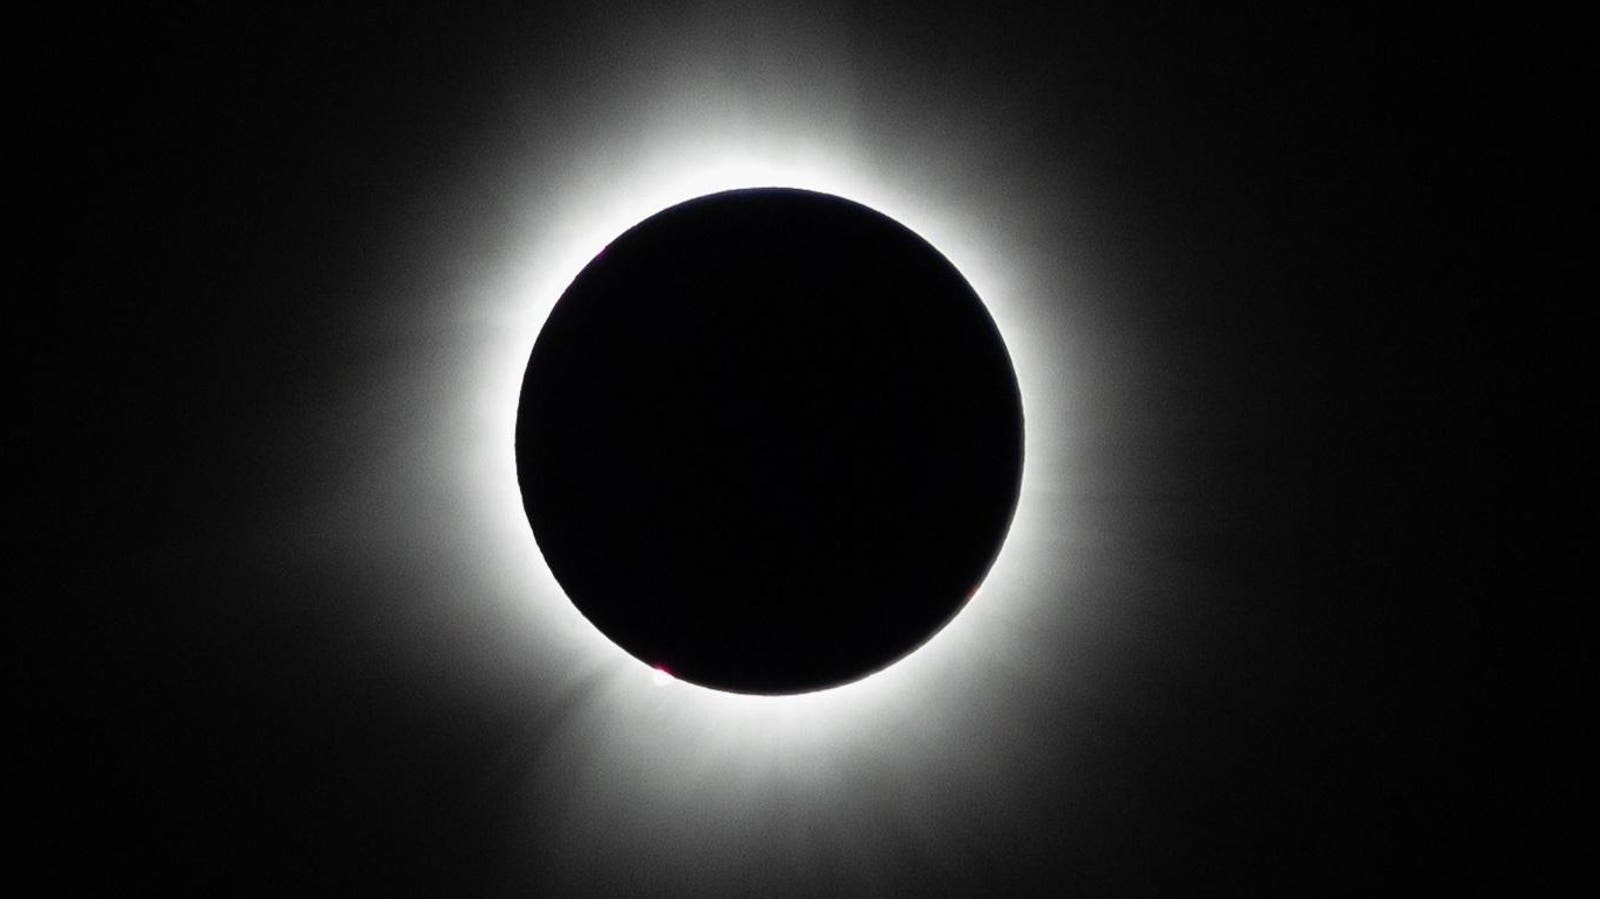 In Photos: Total Solar Eclipse Dazzles Skywatchers Across North America